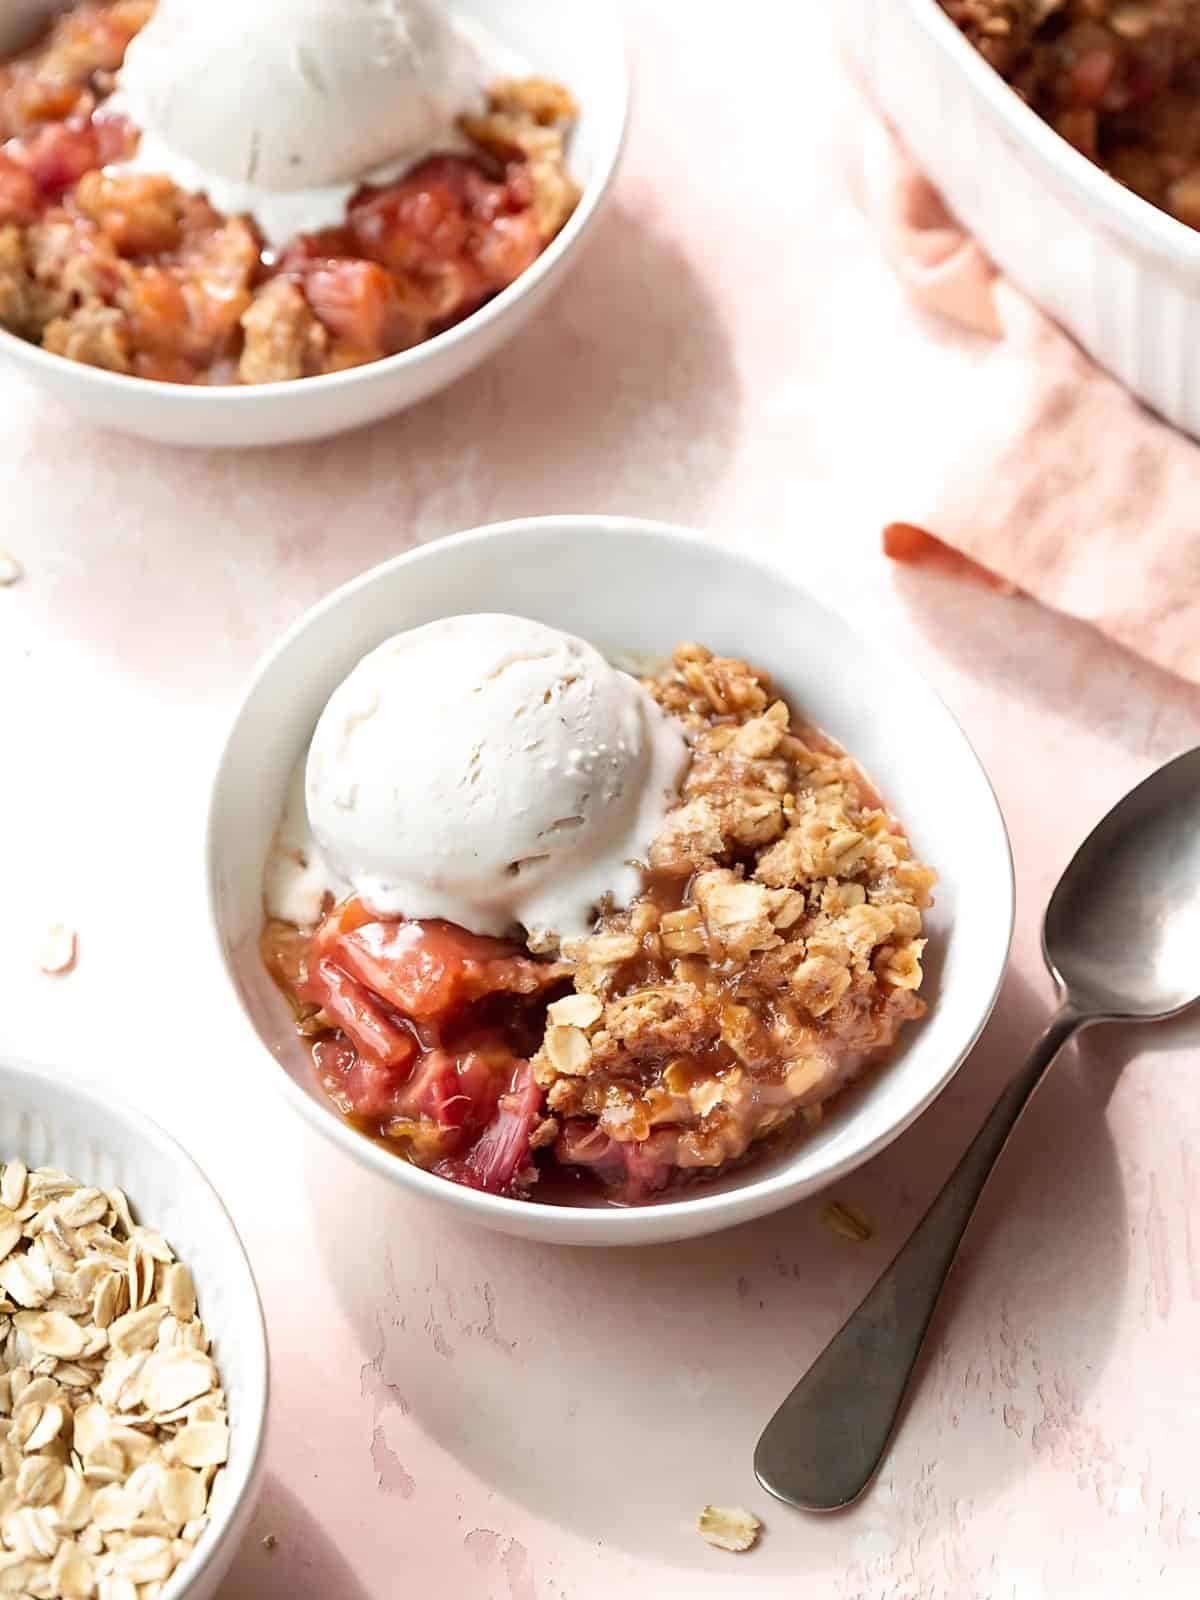 Rhubarb crisps in a bowl topped with ice cream.